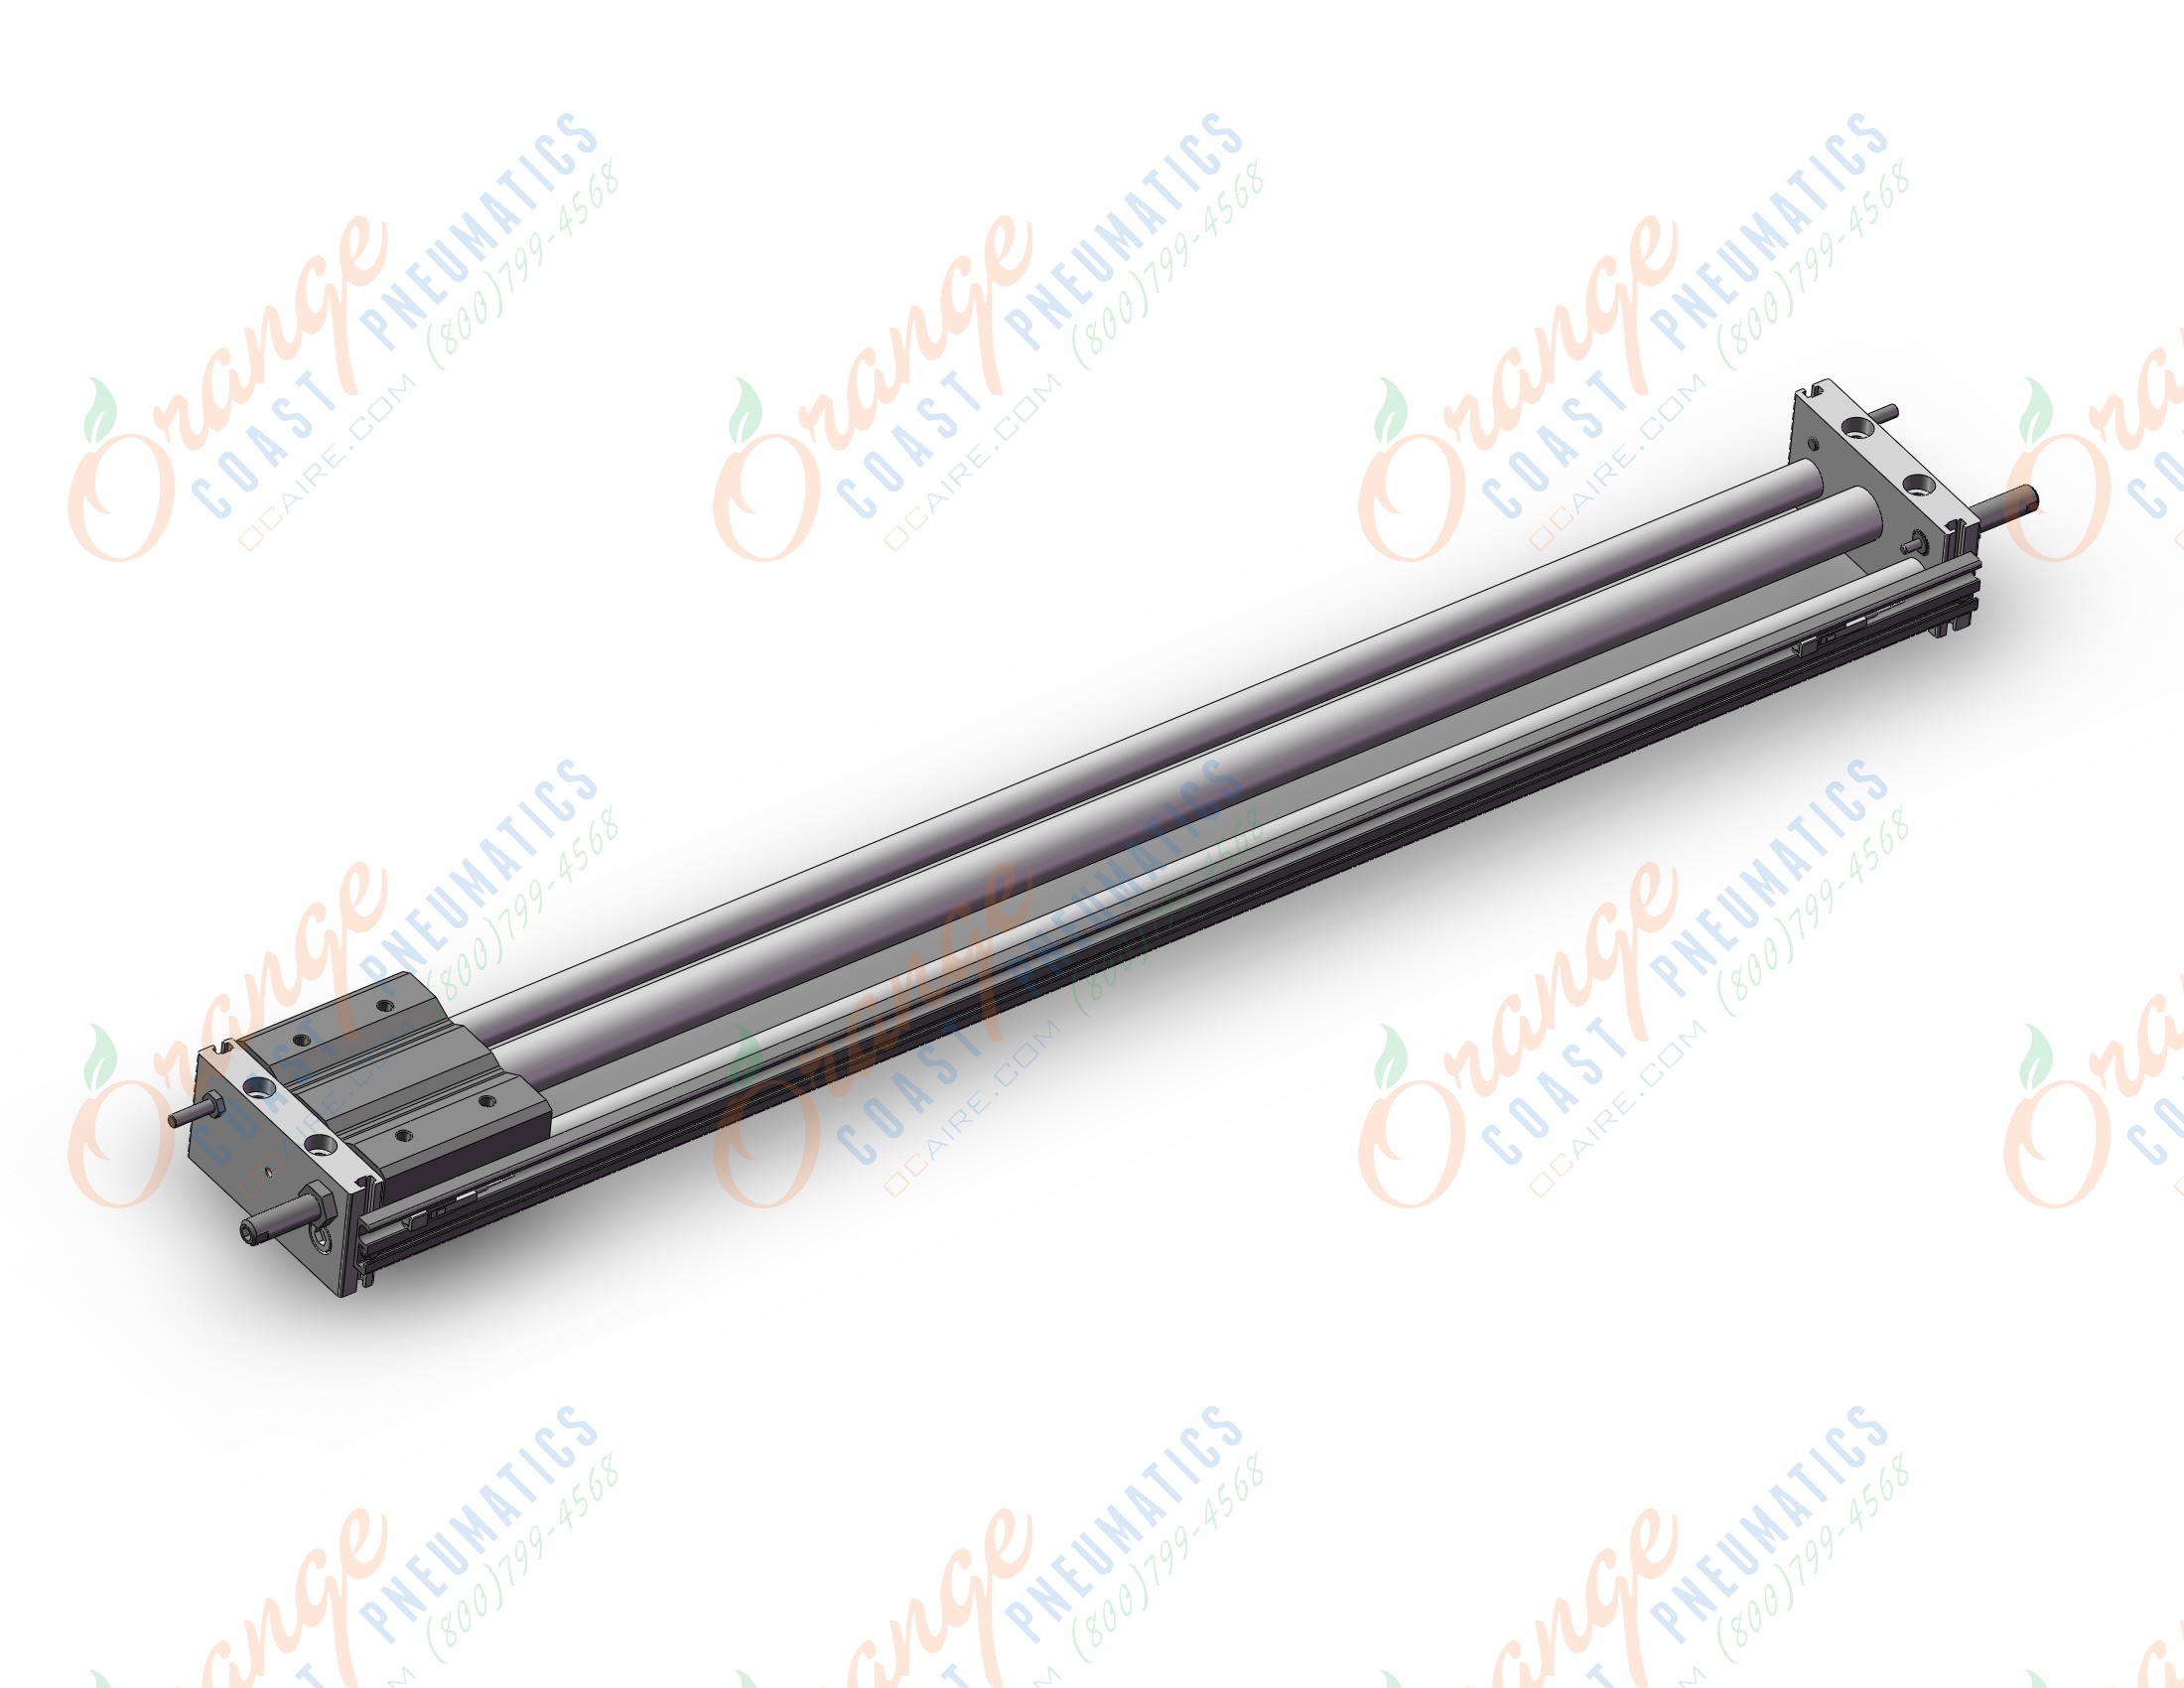 SMC CY1S15-500BZ-M9PAMAPC cy1s-z, magnetically coupled r, CY1S GUIDED CYLINDER